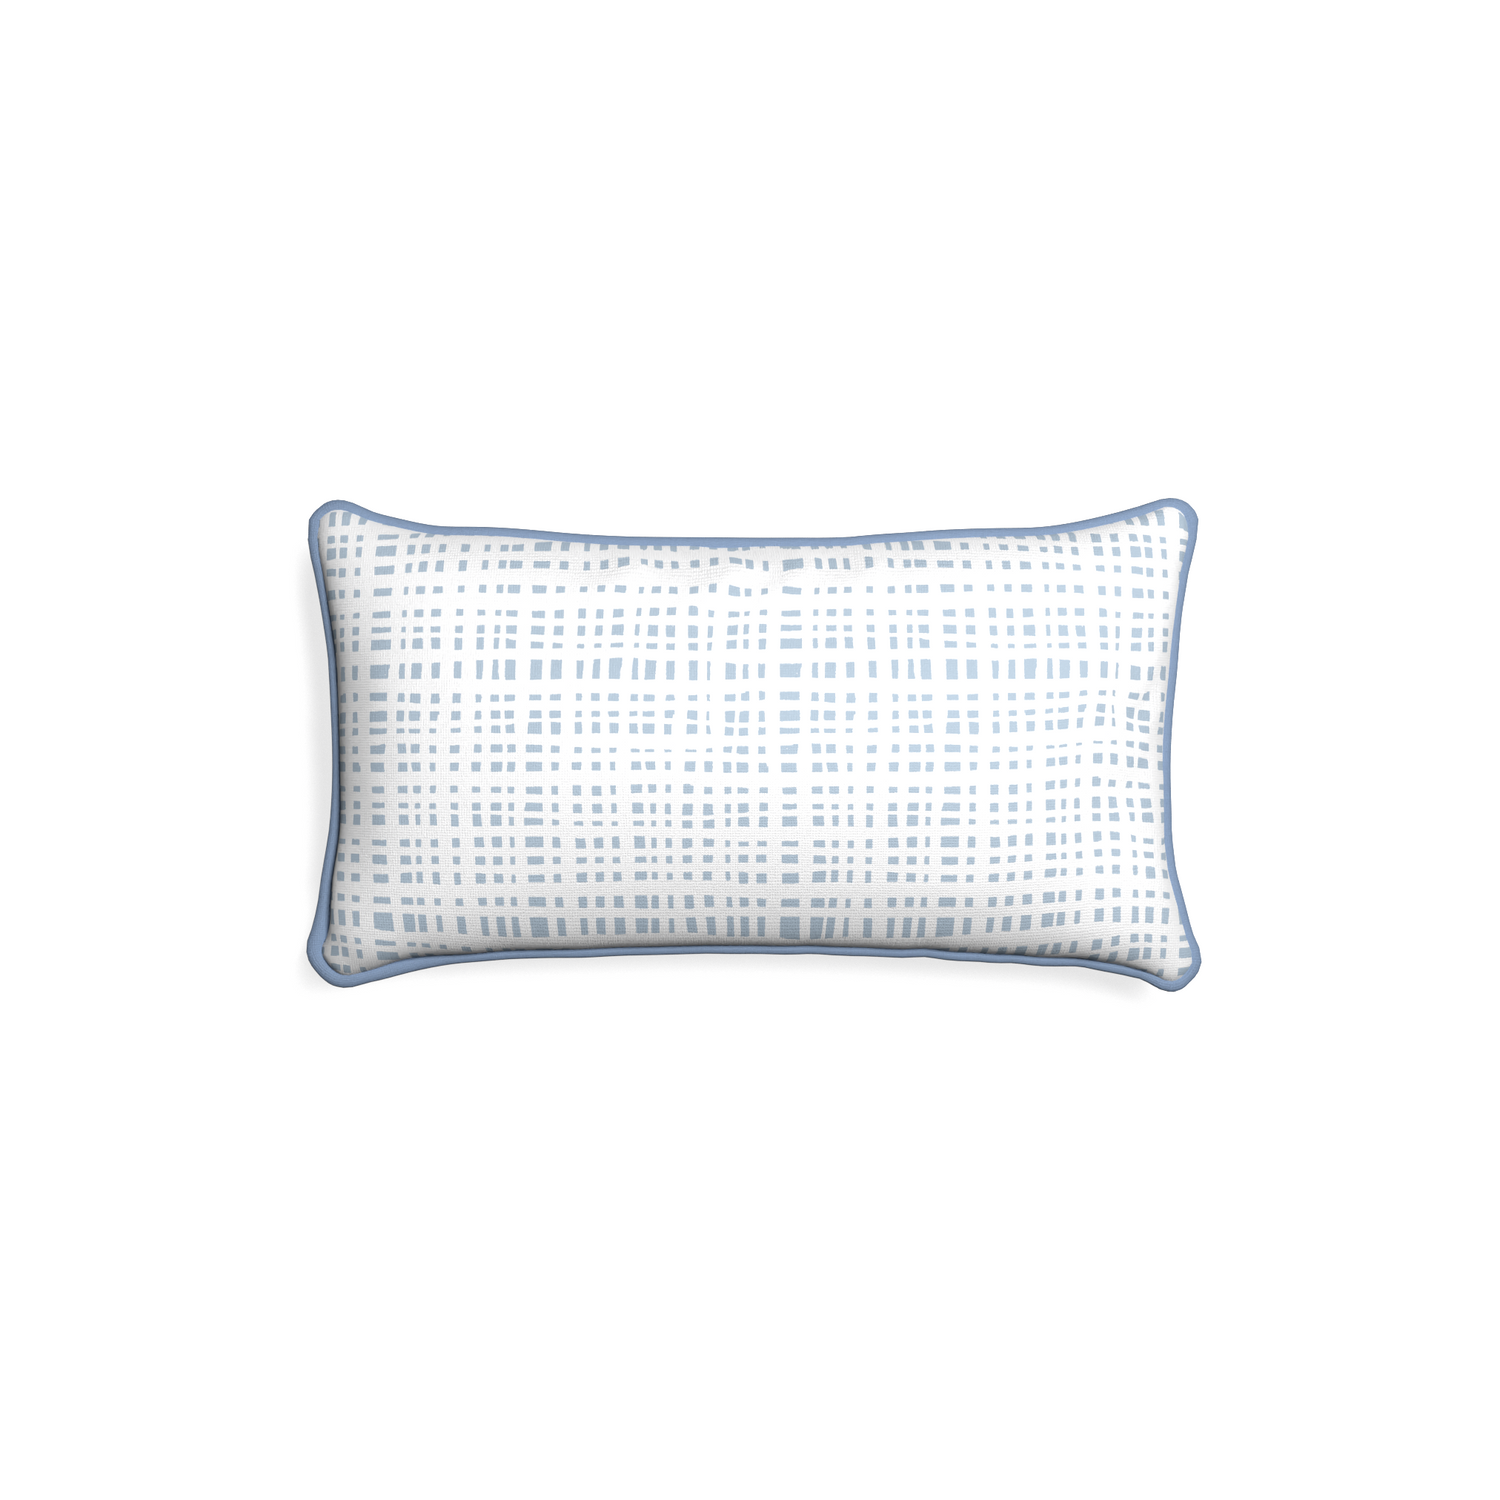 Petite-lumbar ginger custom plaid sky bluepillow with sky piping on white background